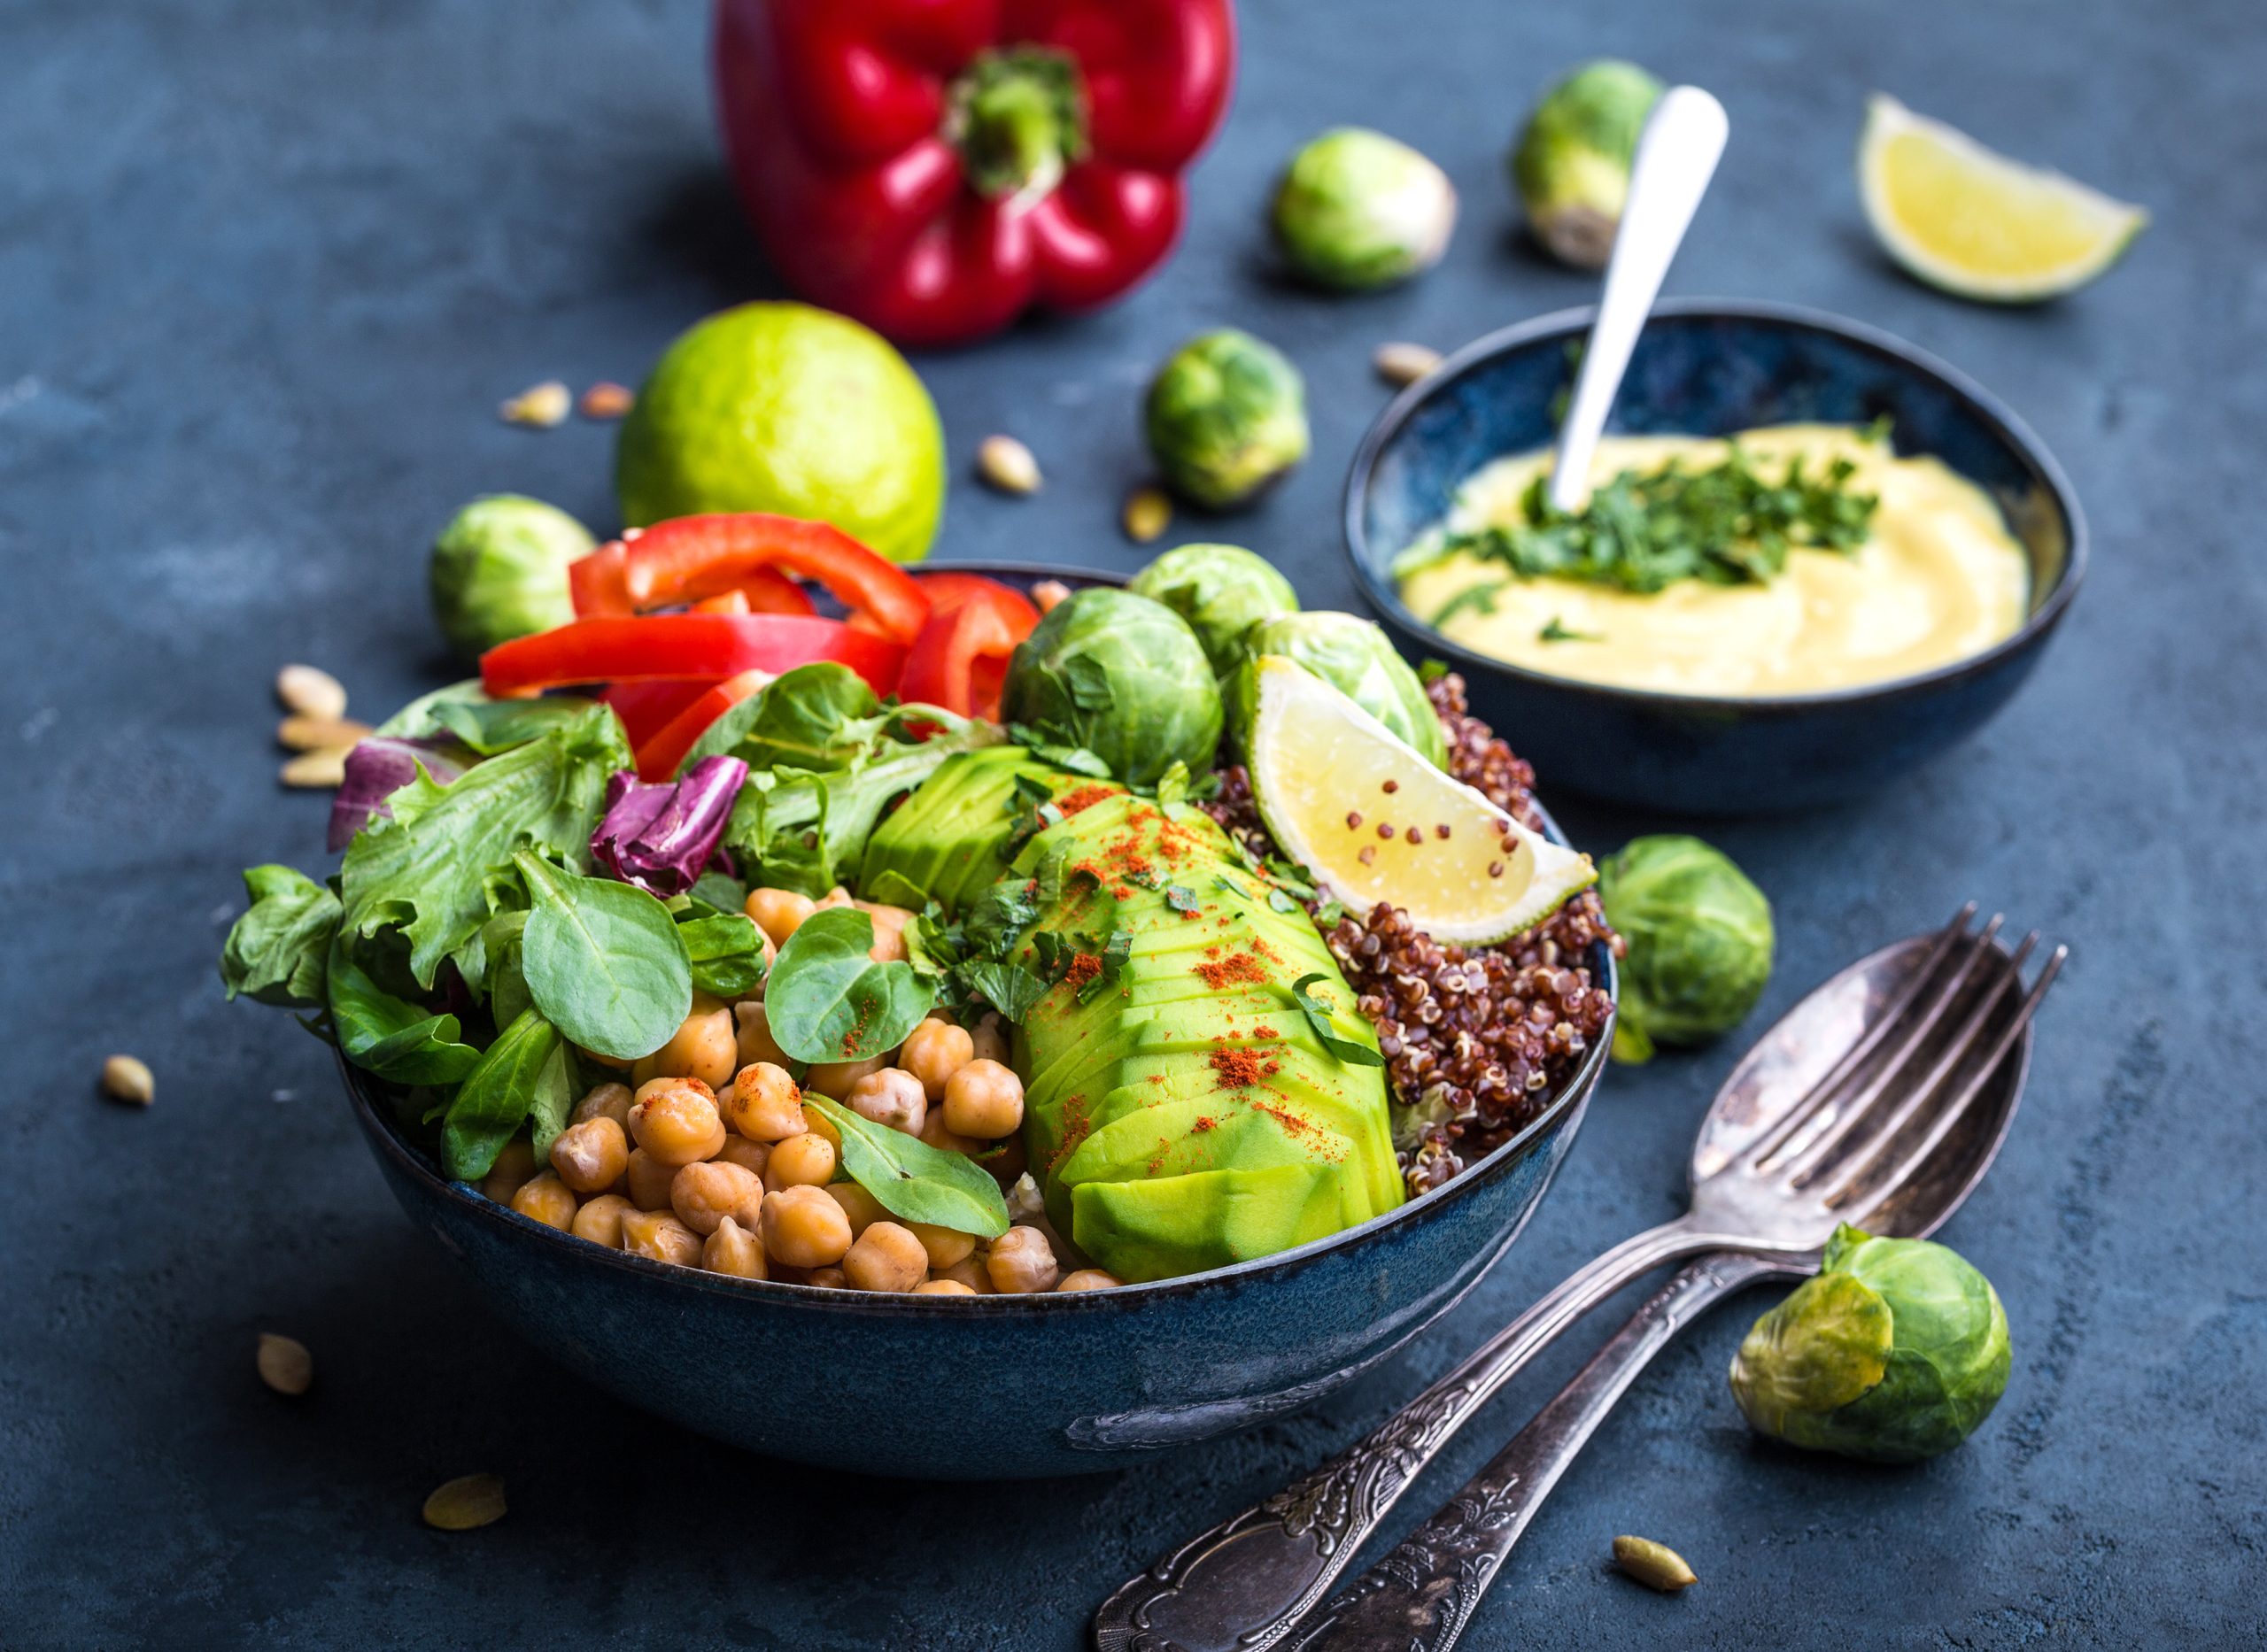 Bowl with healthy salad and dip. Close-up. Buddha bowl with chickpea, avocado, quinoa seeds, red bell pepper, fresh spinach, brussels sprout, lime mix. Vegetarian salad. 30-day plant-based Diet plan